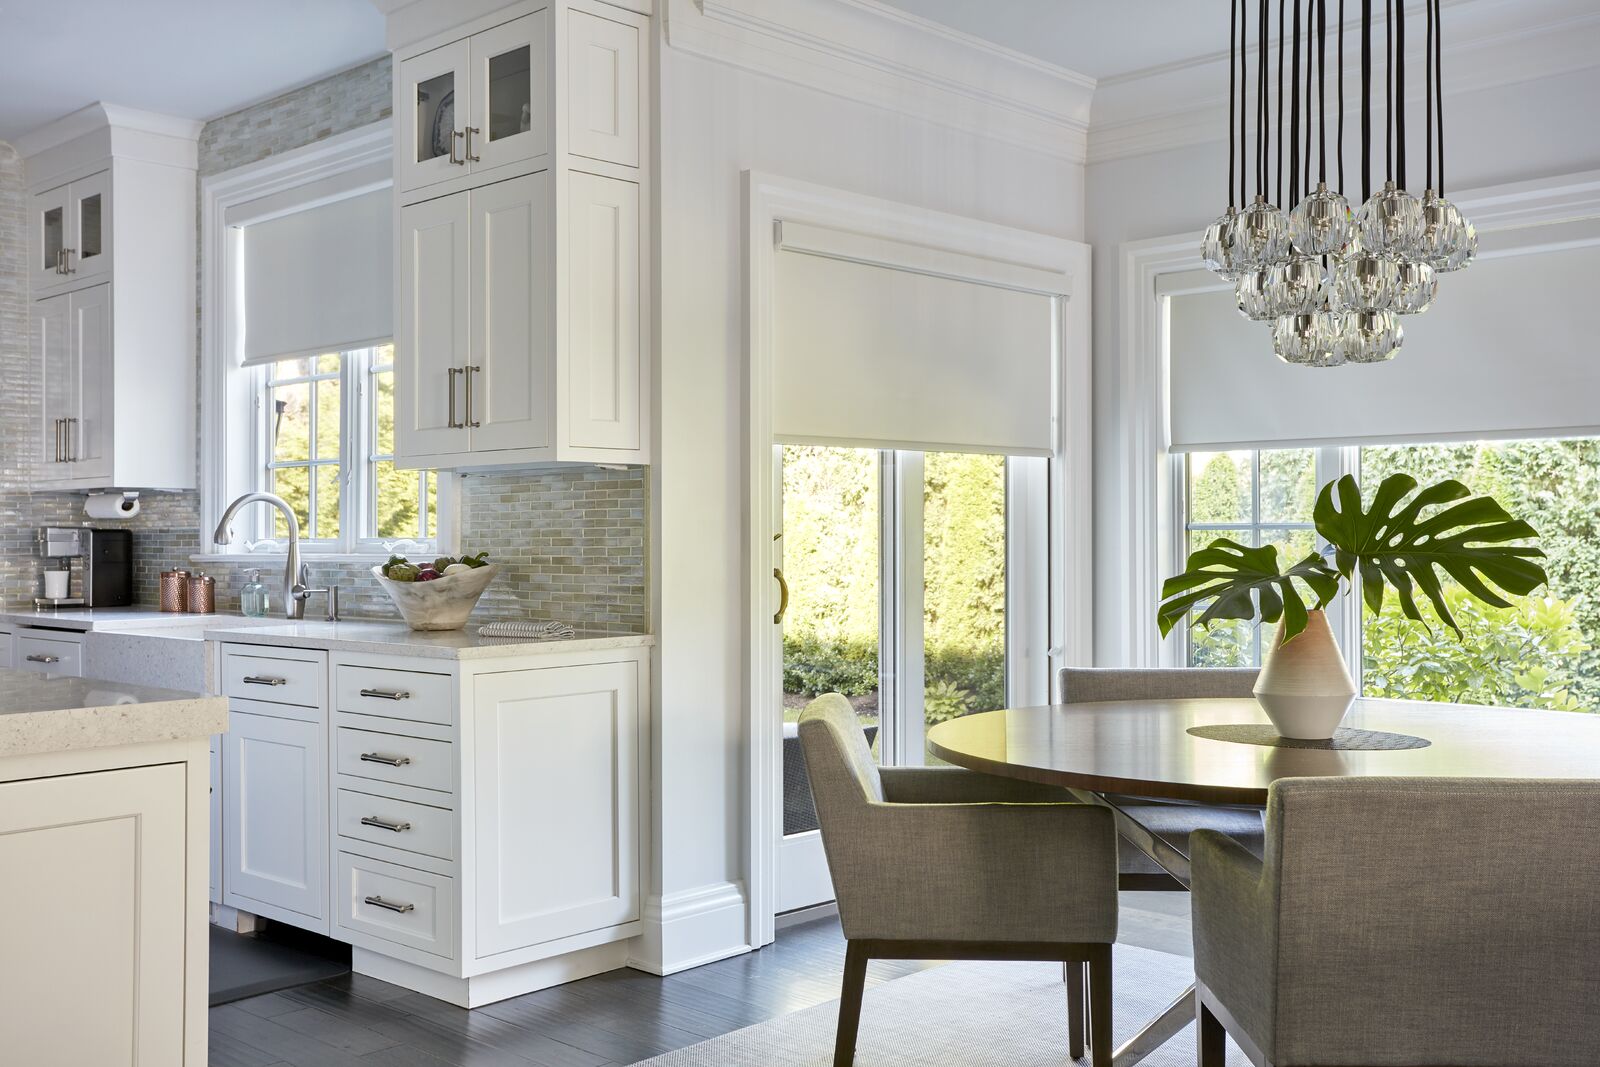 A kitchen and adjacent dining nook both feature white roller shades